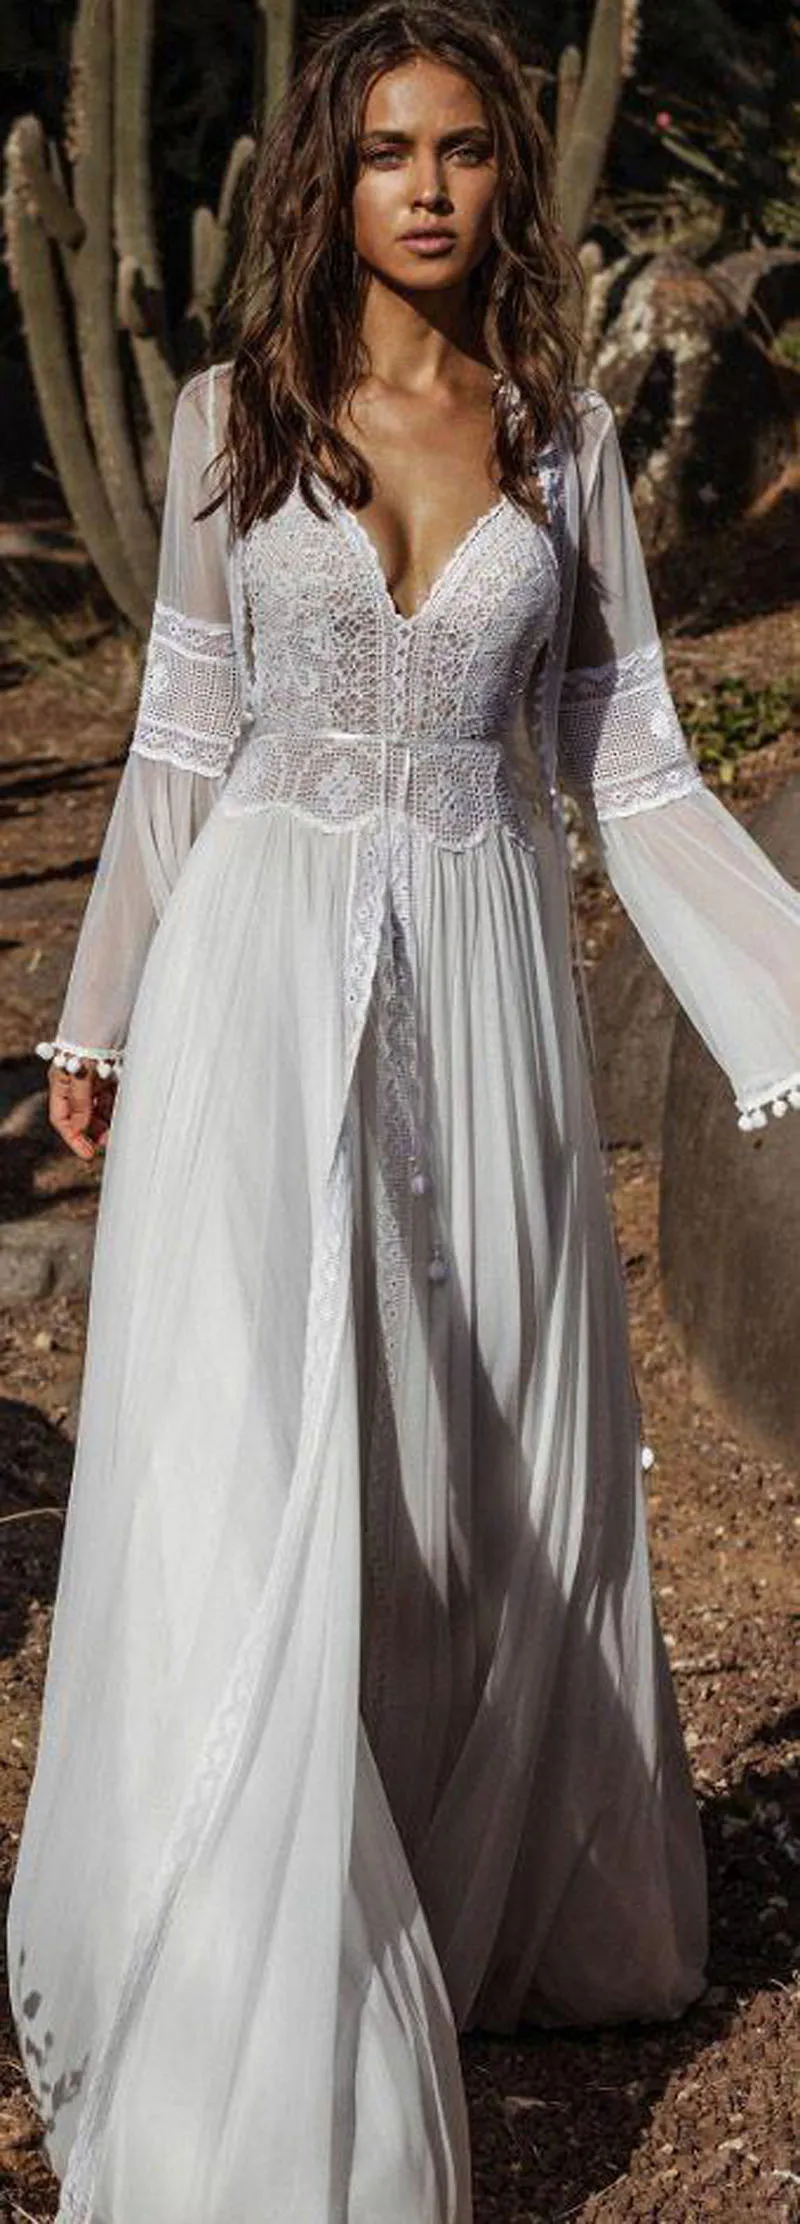 Vintage Crochet Lace Boho Beach Wedding Dress With Long Sleeves And Wrap  Jacket Fairy Flowy Chiffon Beach Boho Bridal Gown By AASAF Dadush Style  293R From Wedswty998, $178.32